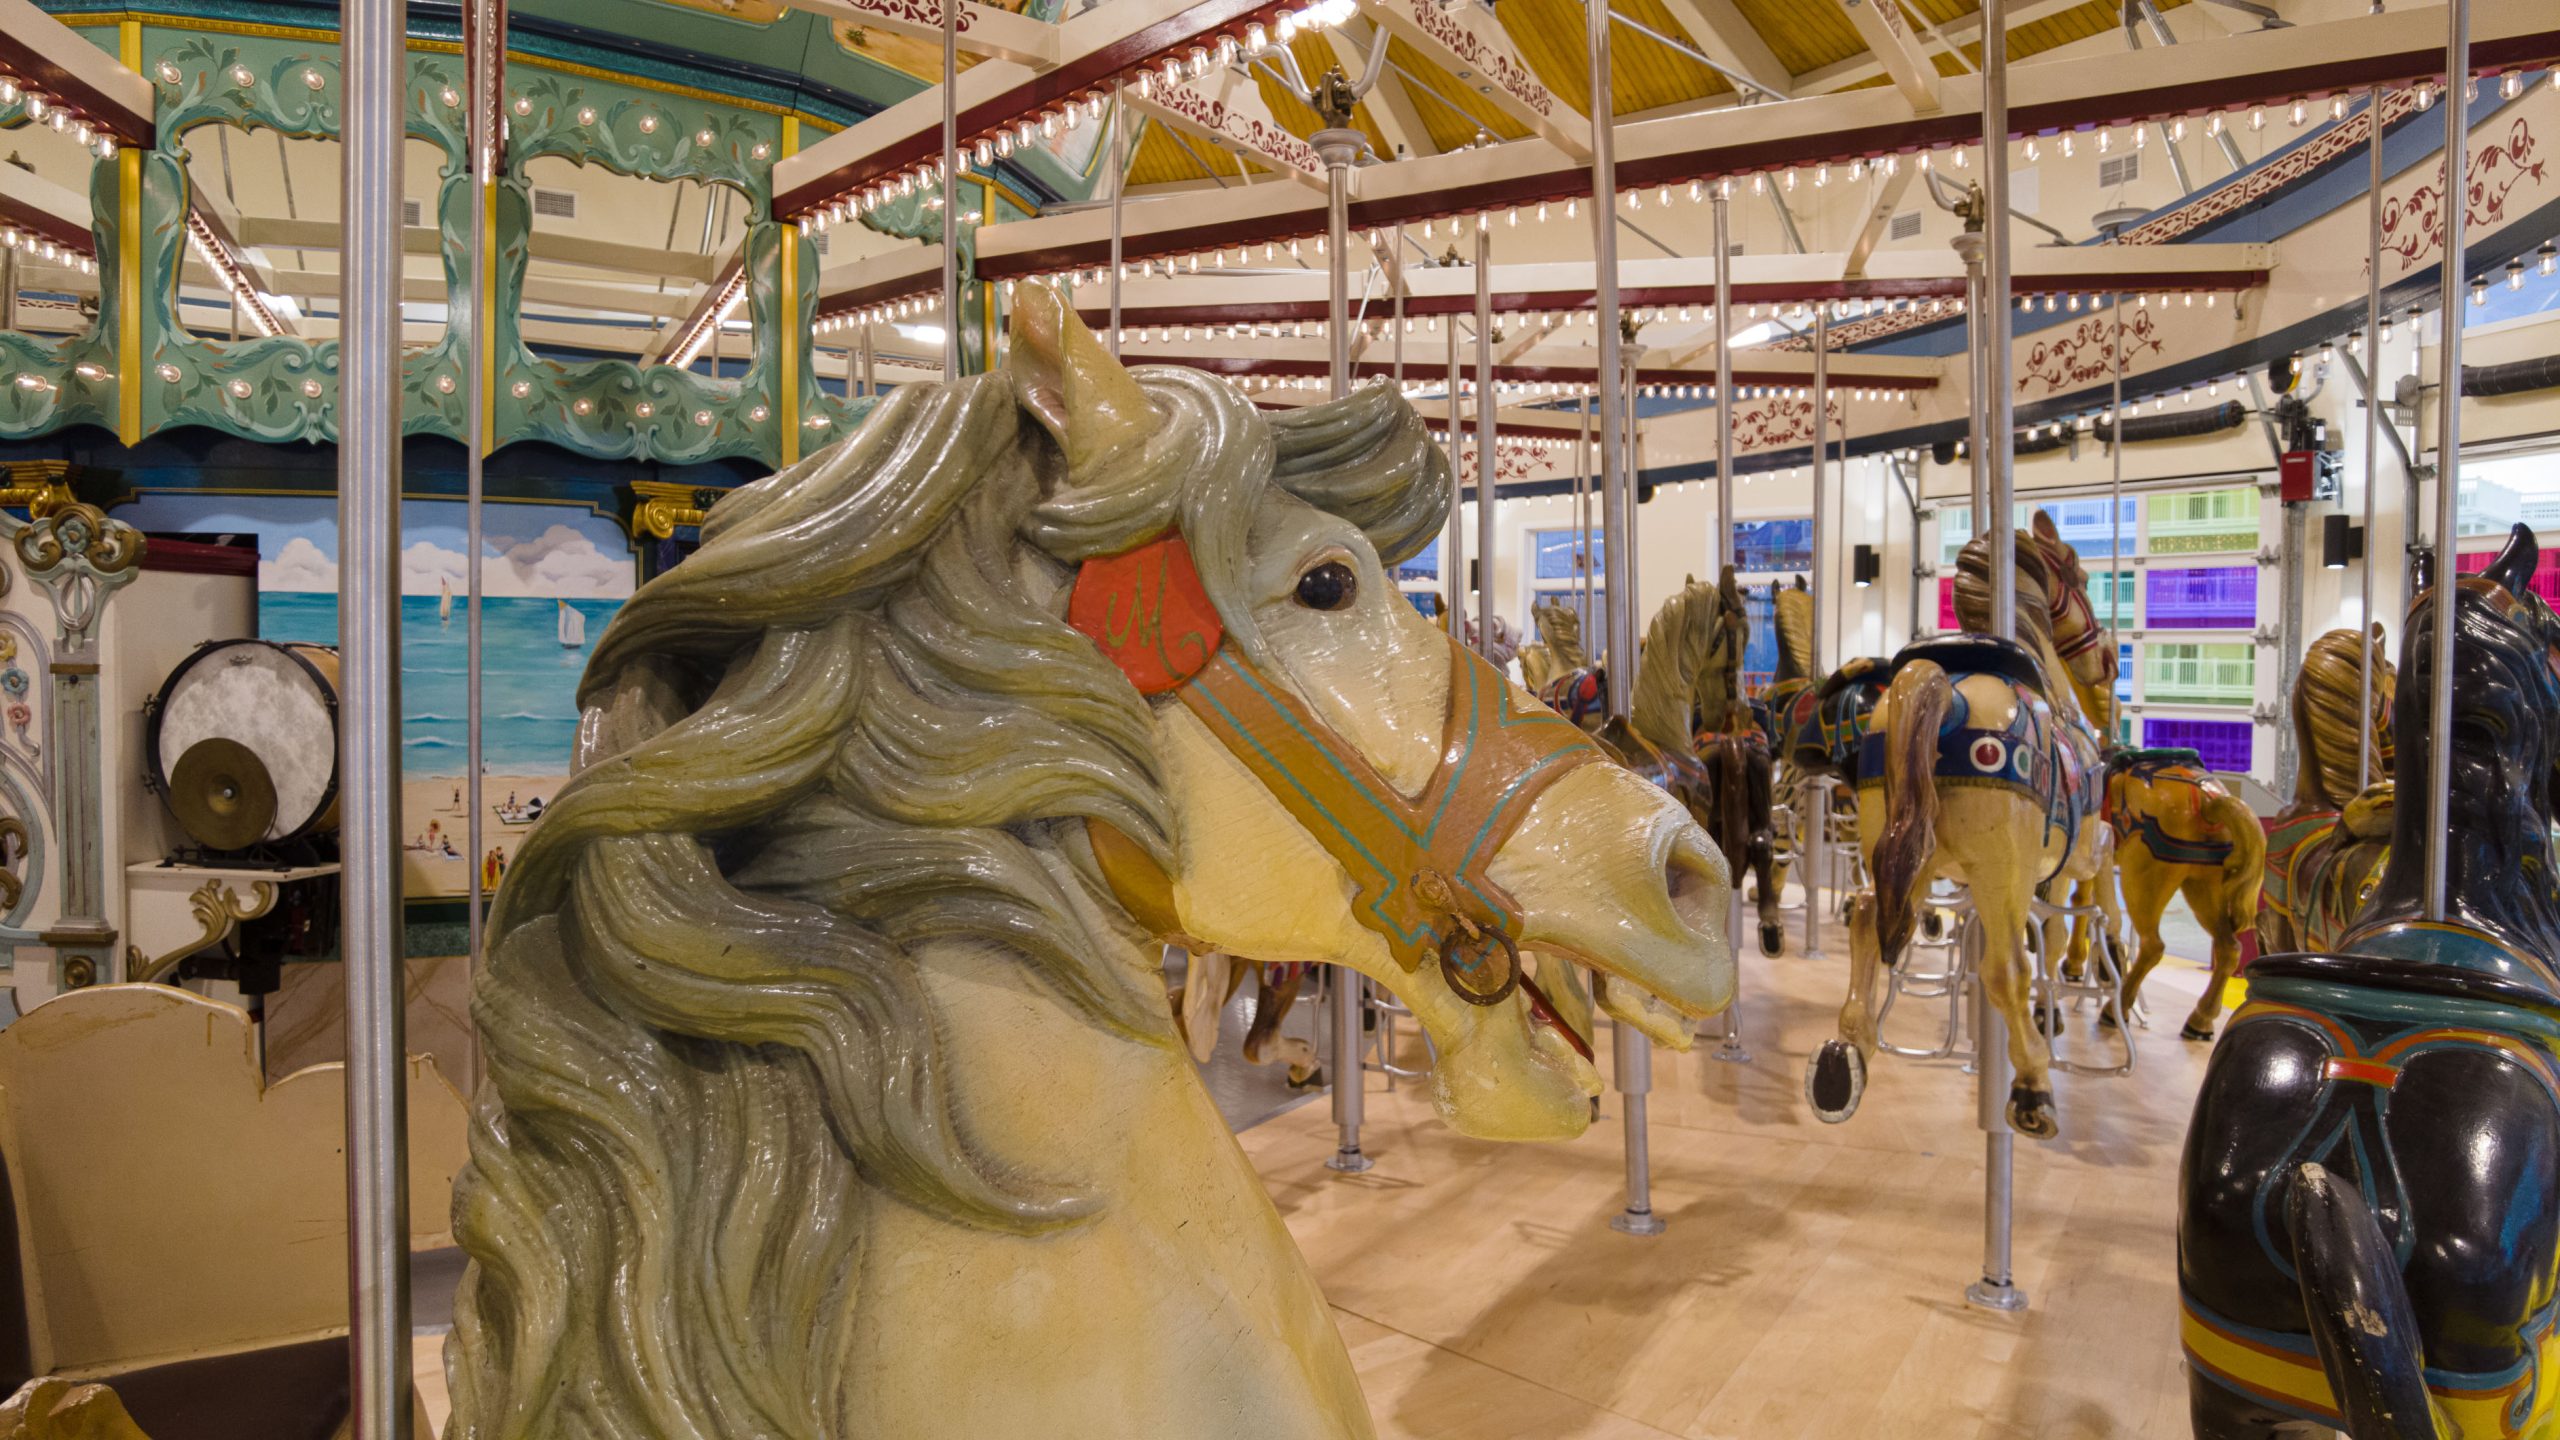 Seaside Heights Historic Carousel Spins Again, With Secrets of Its Past  Unlocked – Toms River, NJ Shorebeat